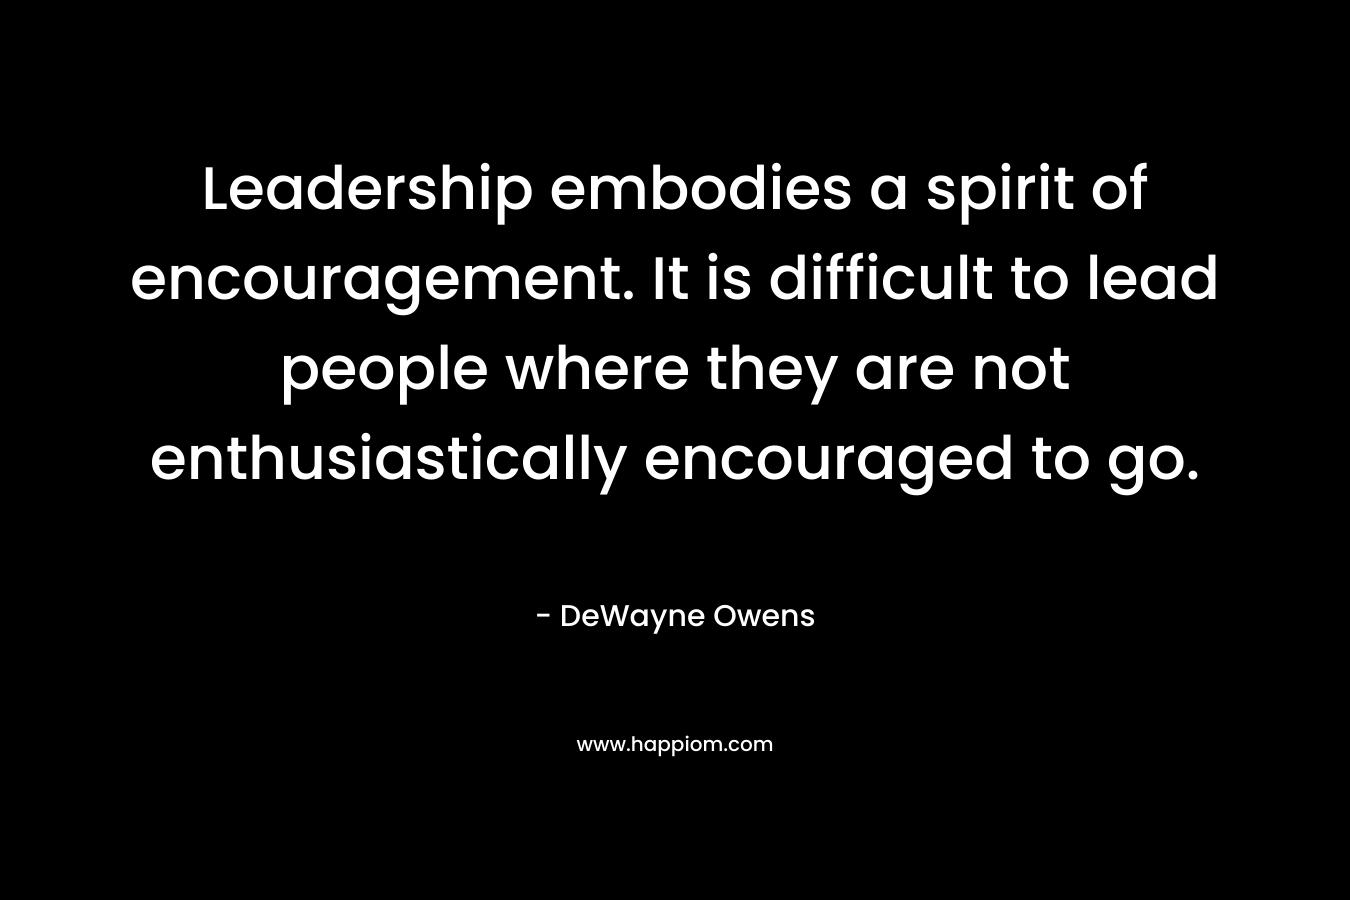 Leadership embodies a spirit of encouragement. It is difficult to lead people where they are not enthusiastically encouraged to go.